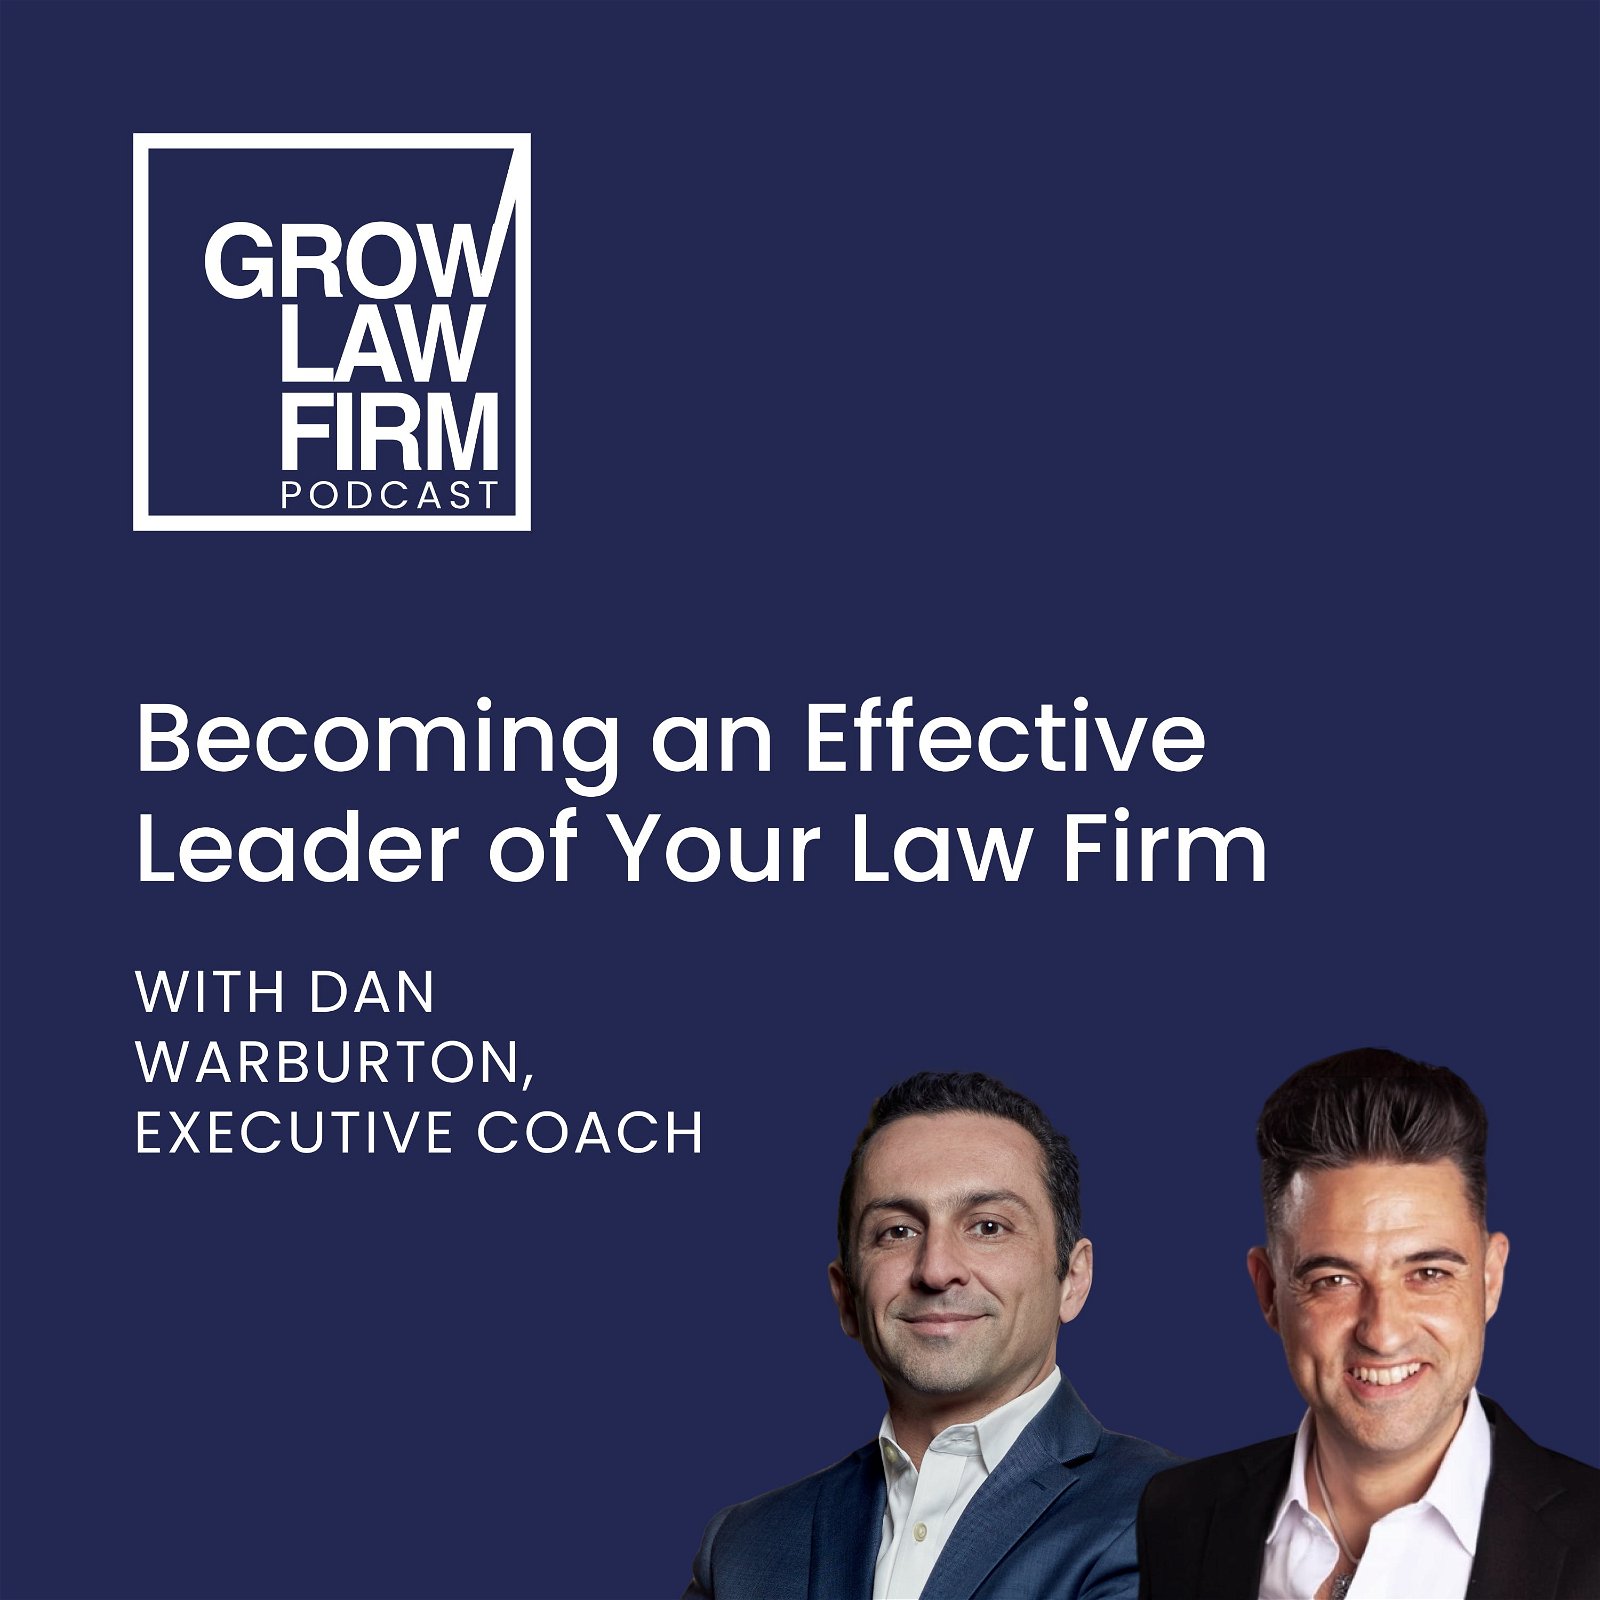 Becoming an Effective Leader of Your Law Firm with Dan Warburton, Executive Coach